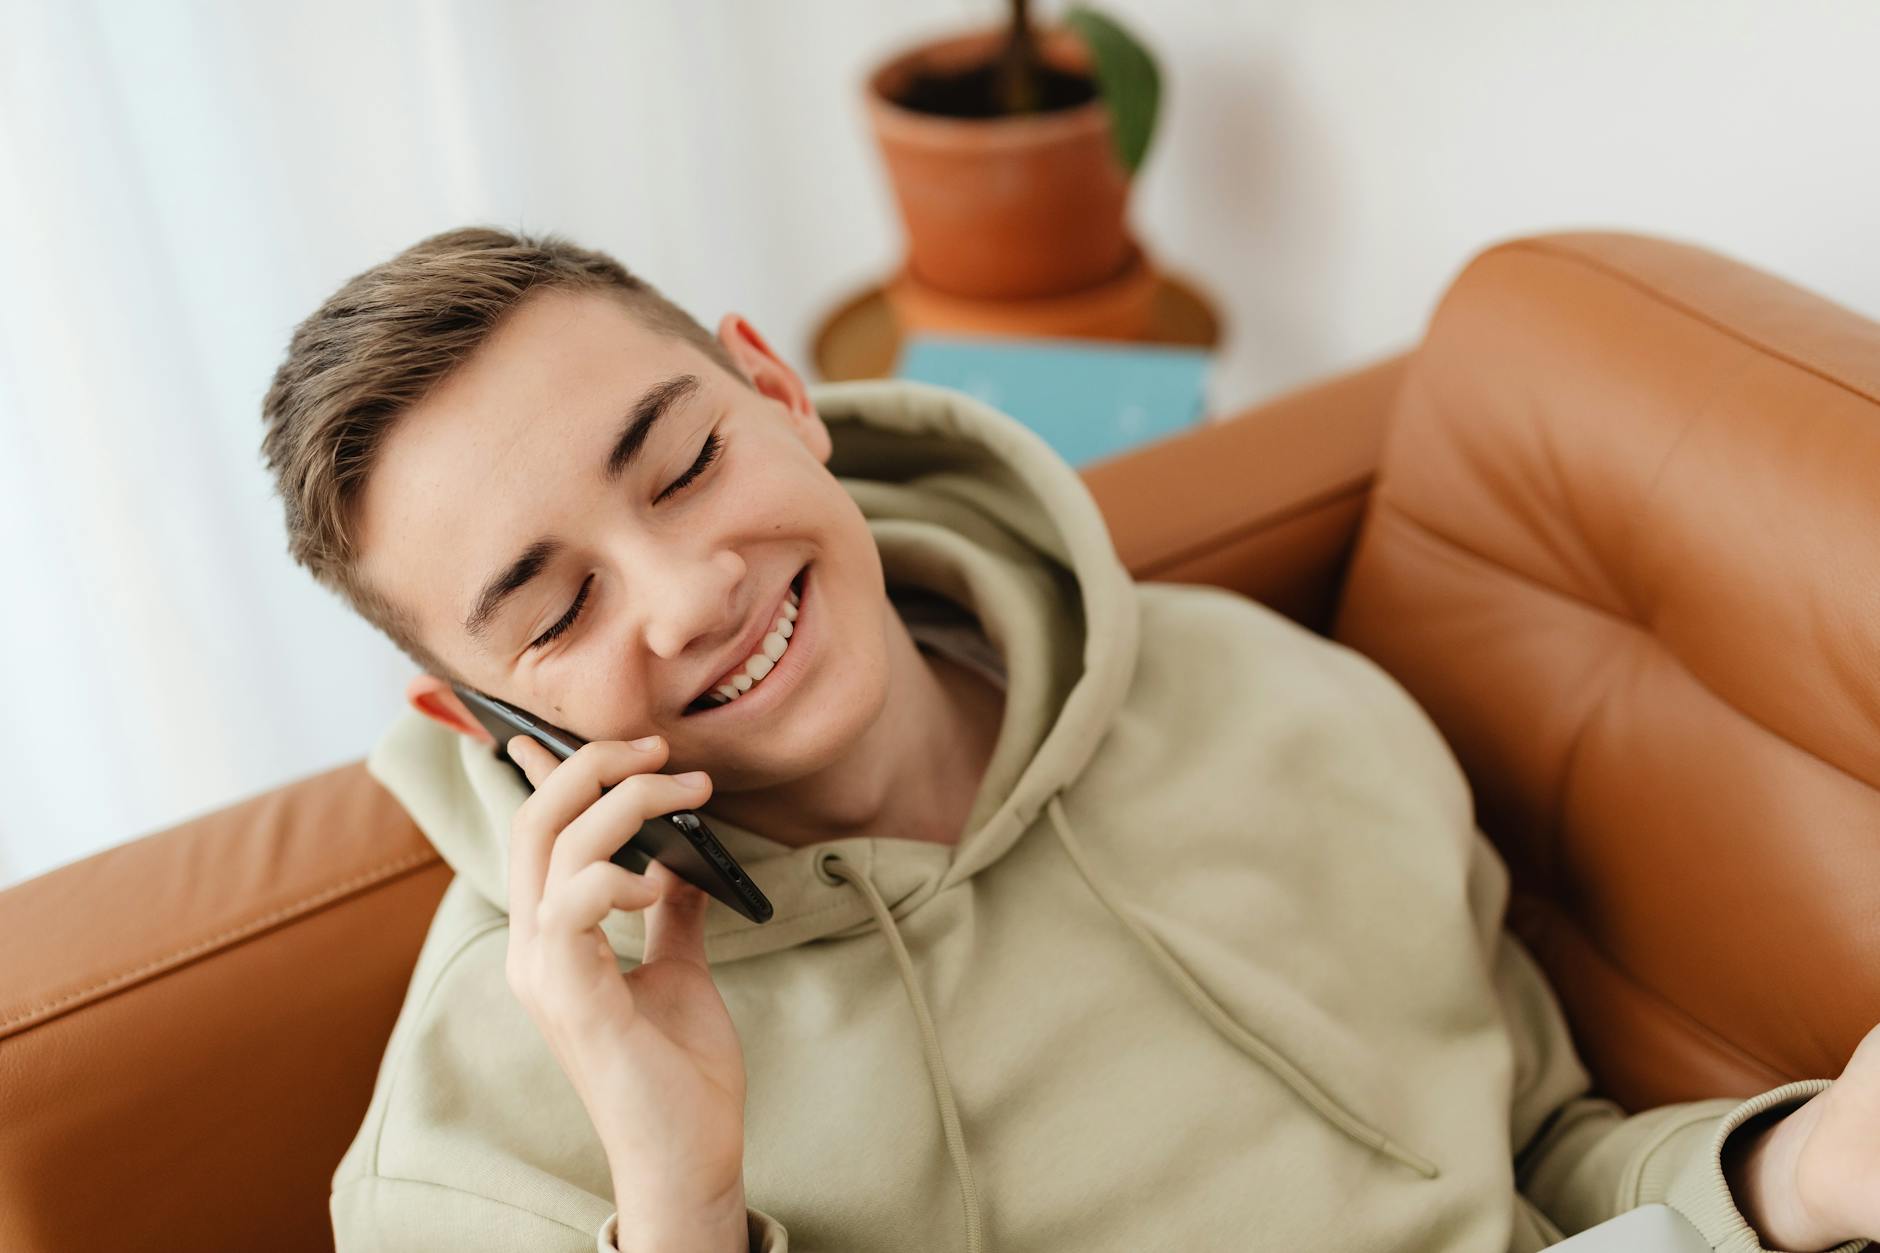 A Young Boy in Hoodie Jacket Talking on the Phone